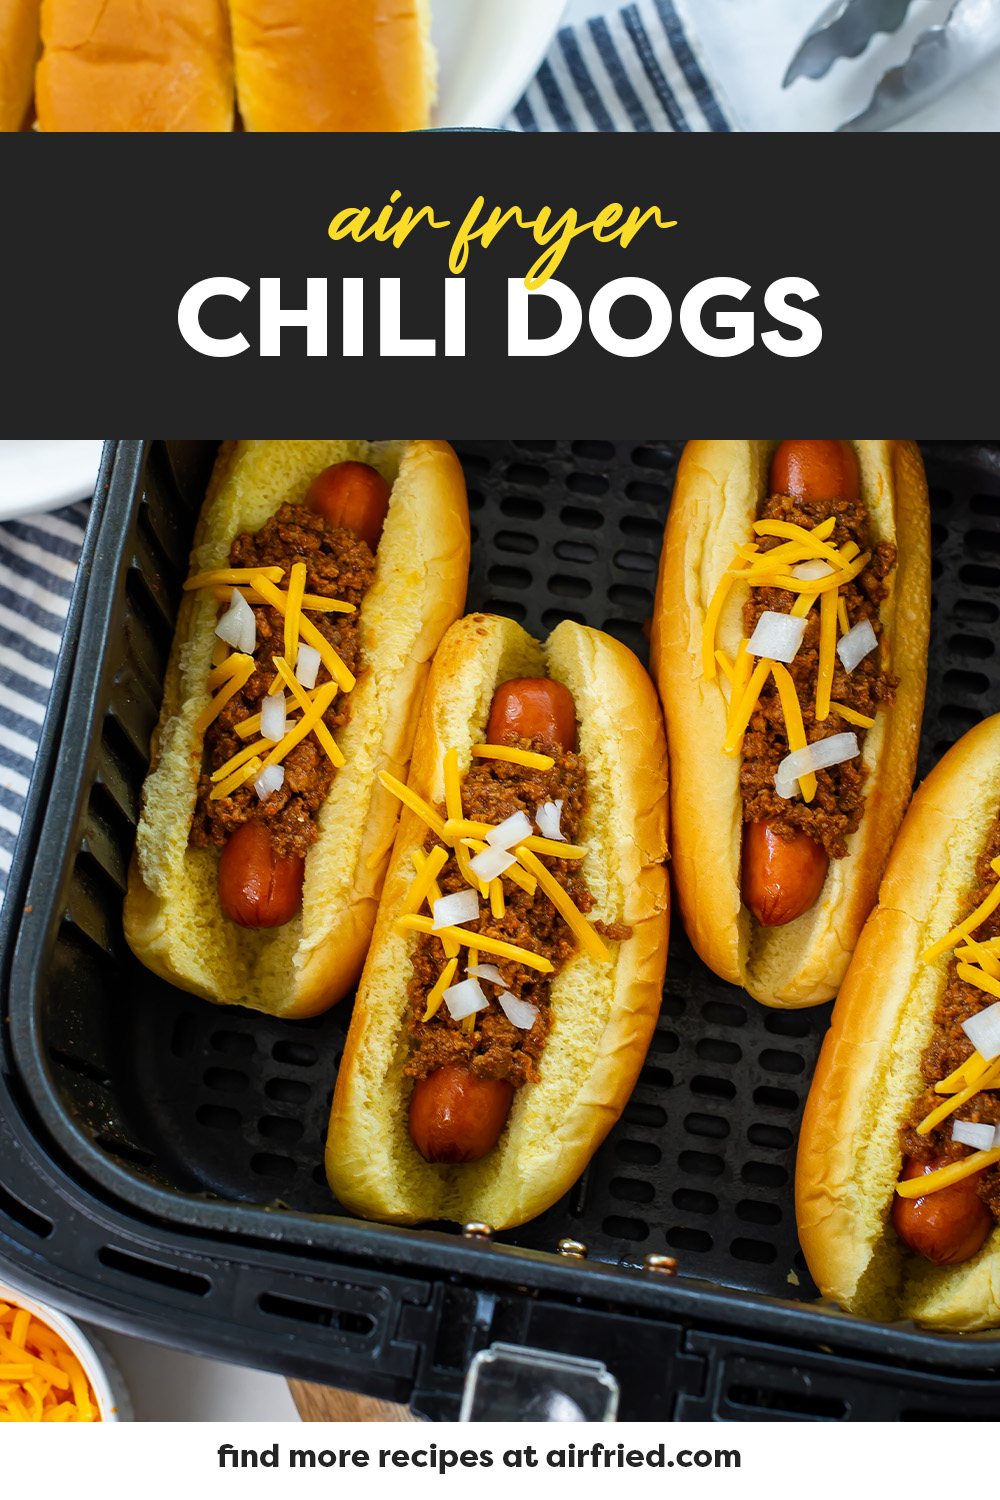 These air fryer chili dogs are simple to make, yummy to eat, and easy to customize!